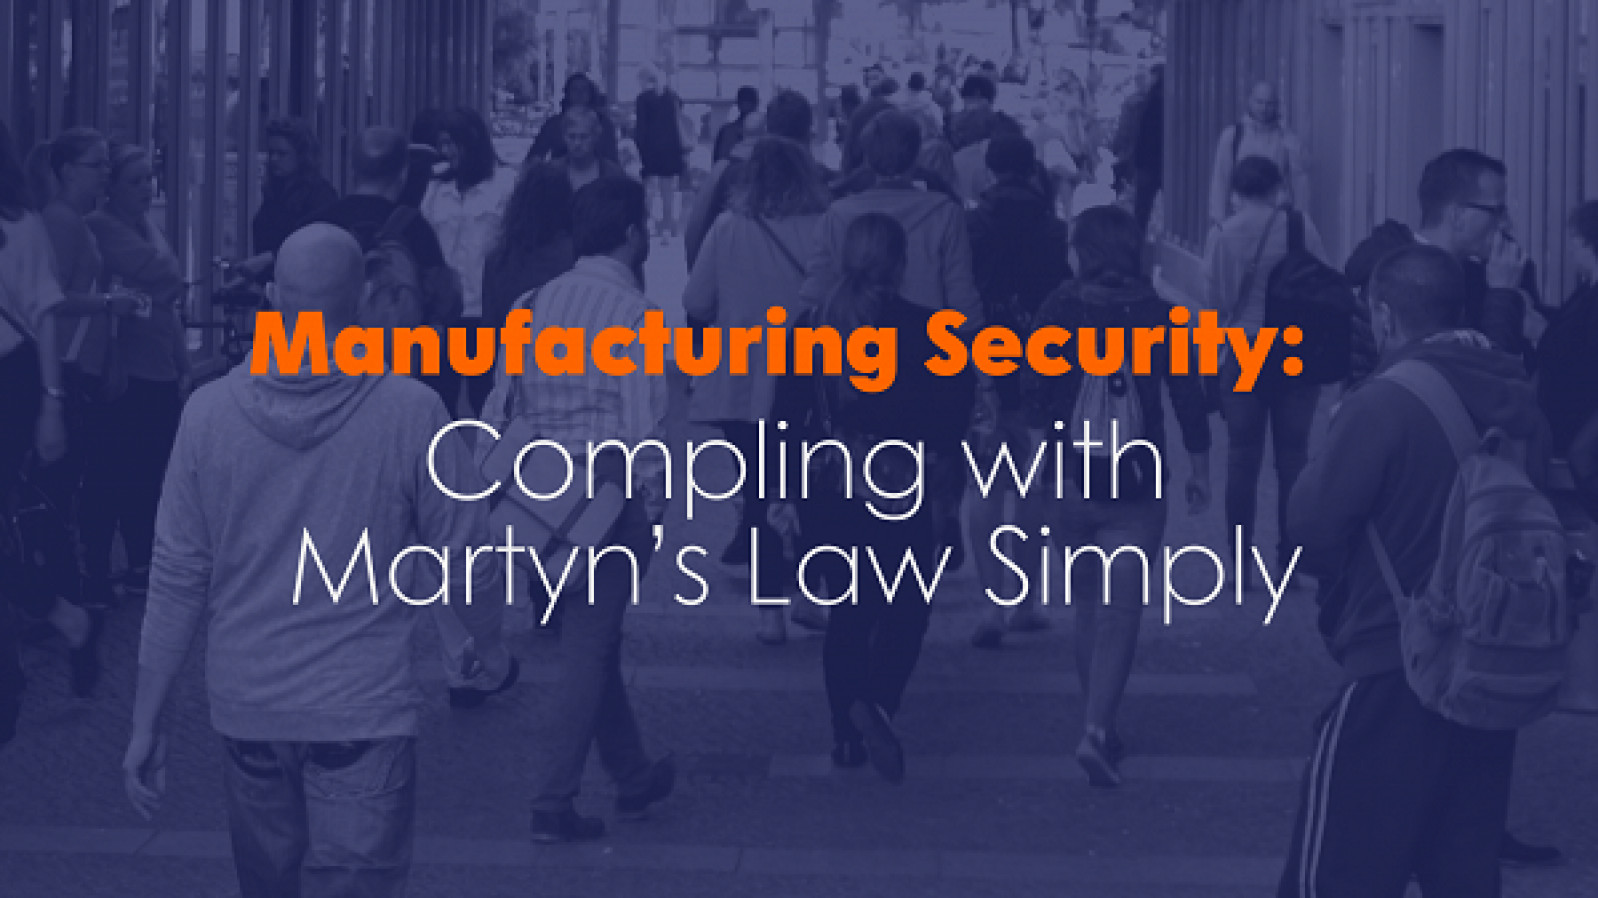 Manufacturing Security: Complying with Martyn’s La...